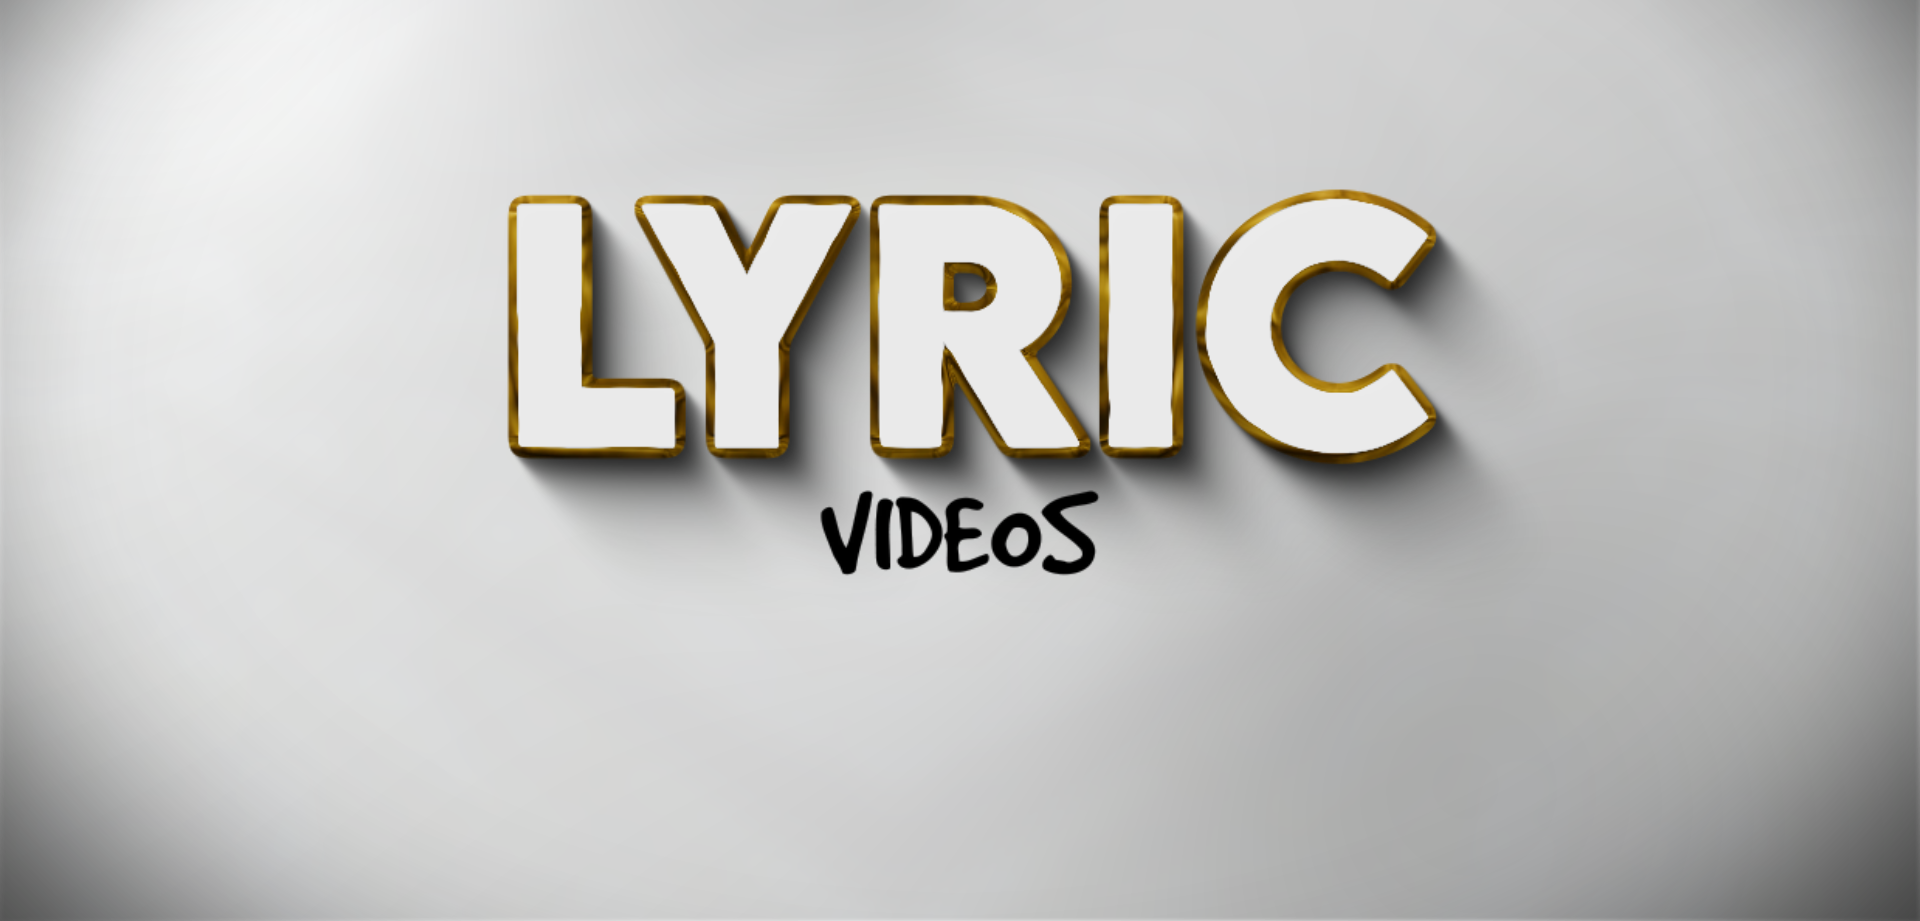 Lyric Video Projects  Photos, videos, logos, illustrations and